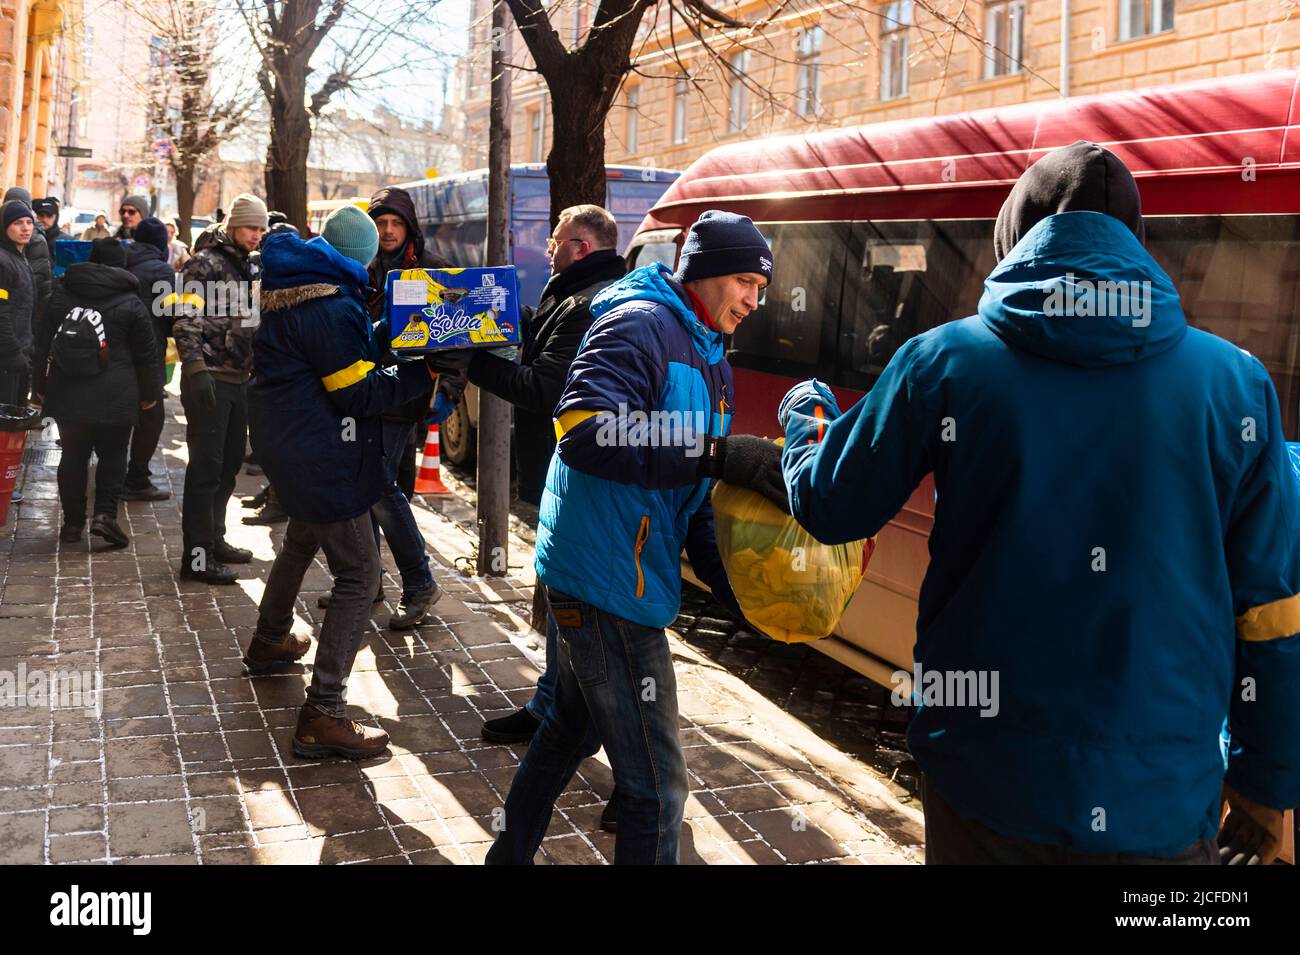 Helpers pack relief supplies and food into shelters. The city is preparing for war here as well. Stock Photo